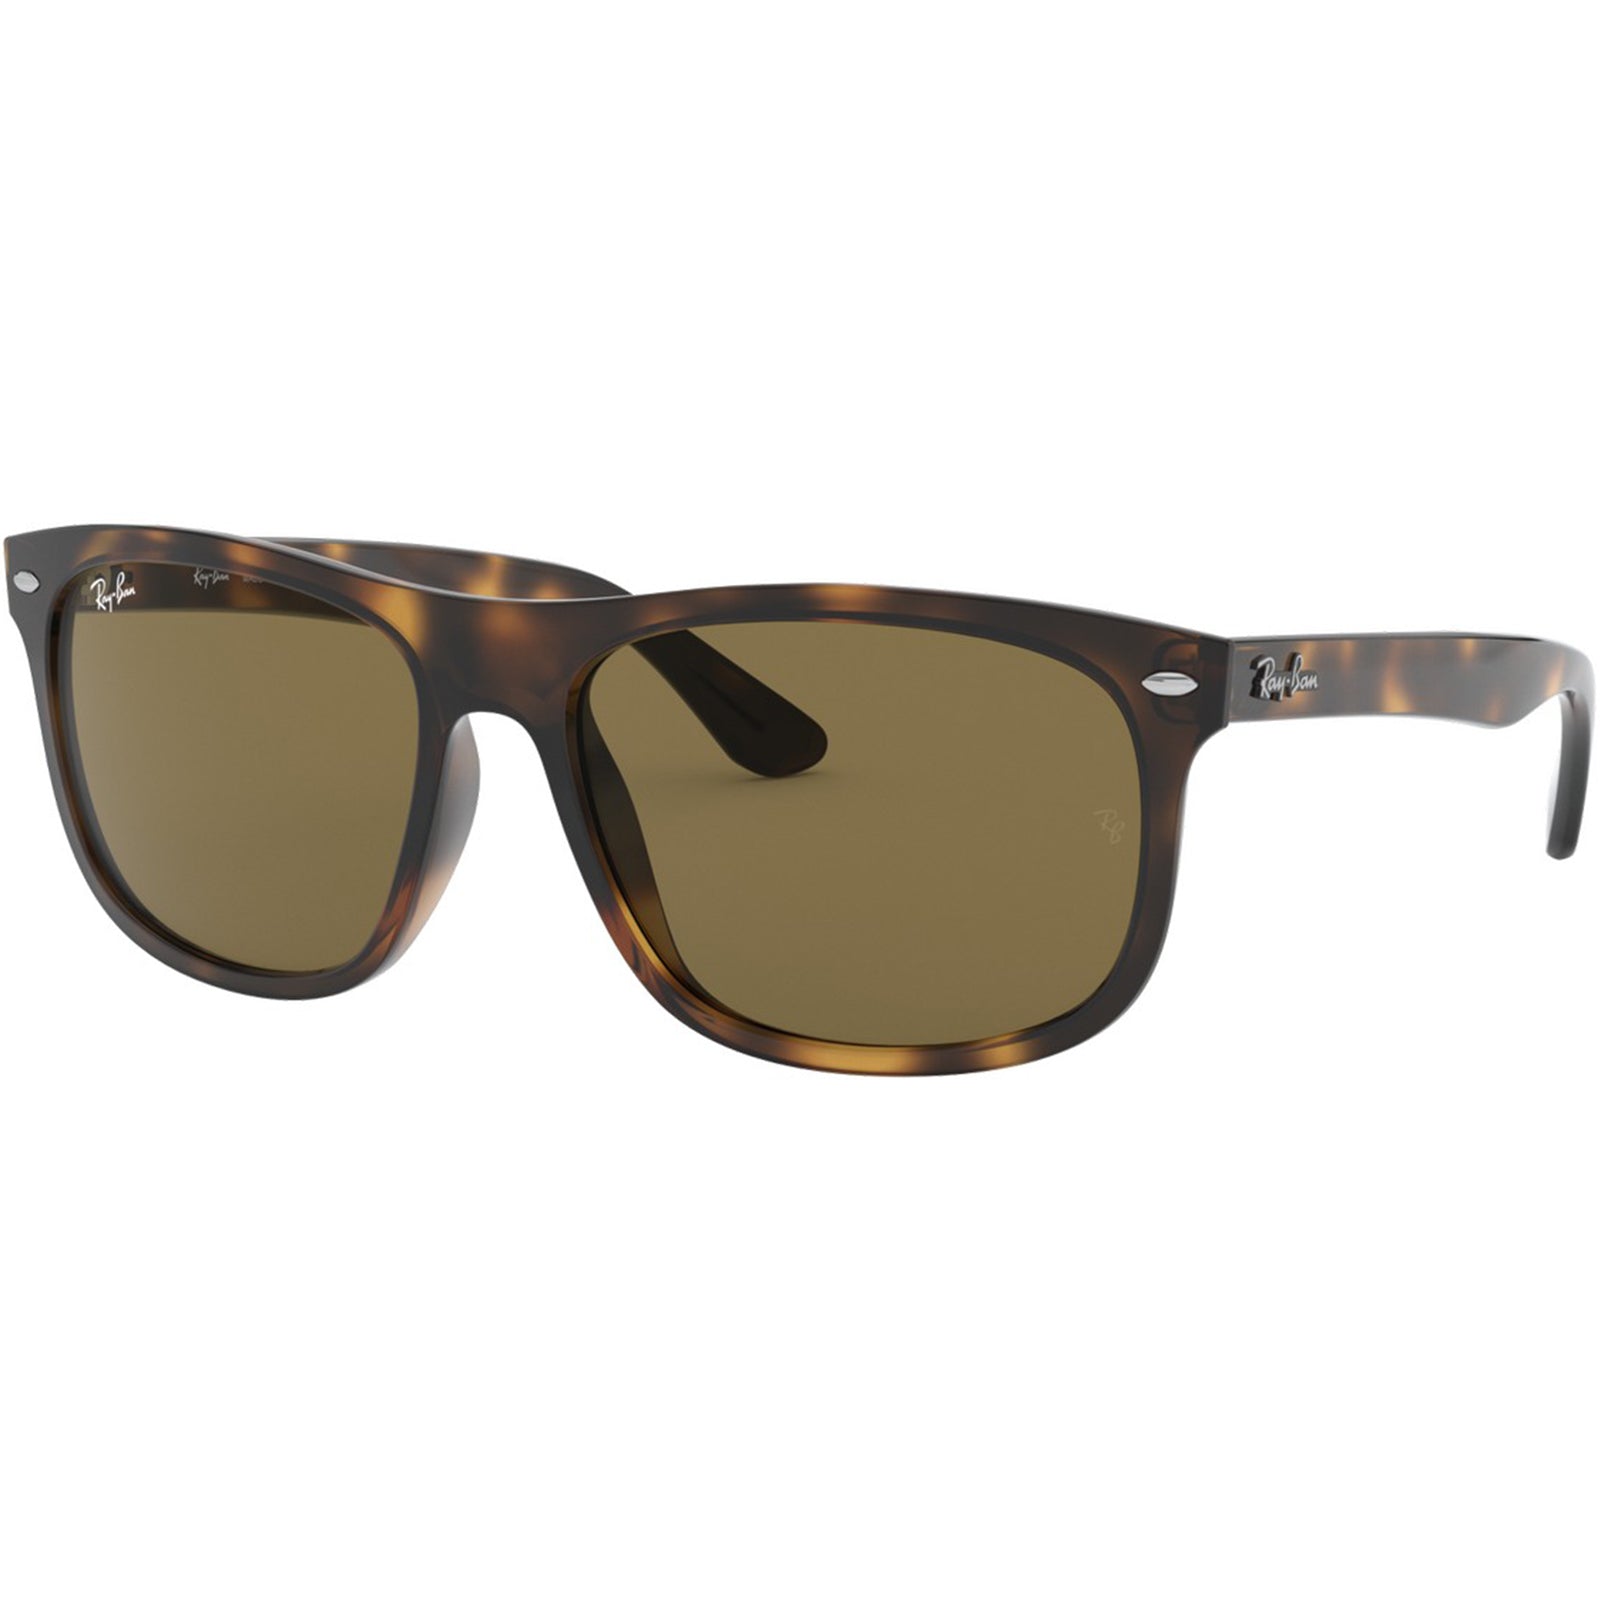 Ray-Ban RB4226 Men's Lifestyle Sunglasses-0RB4226